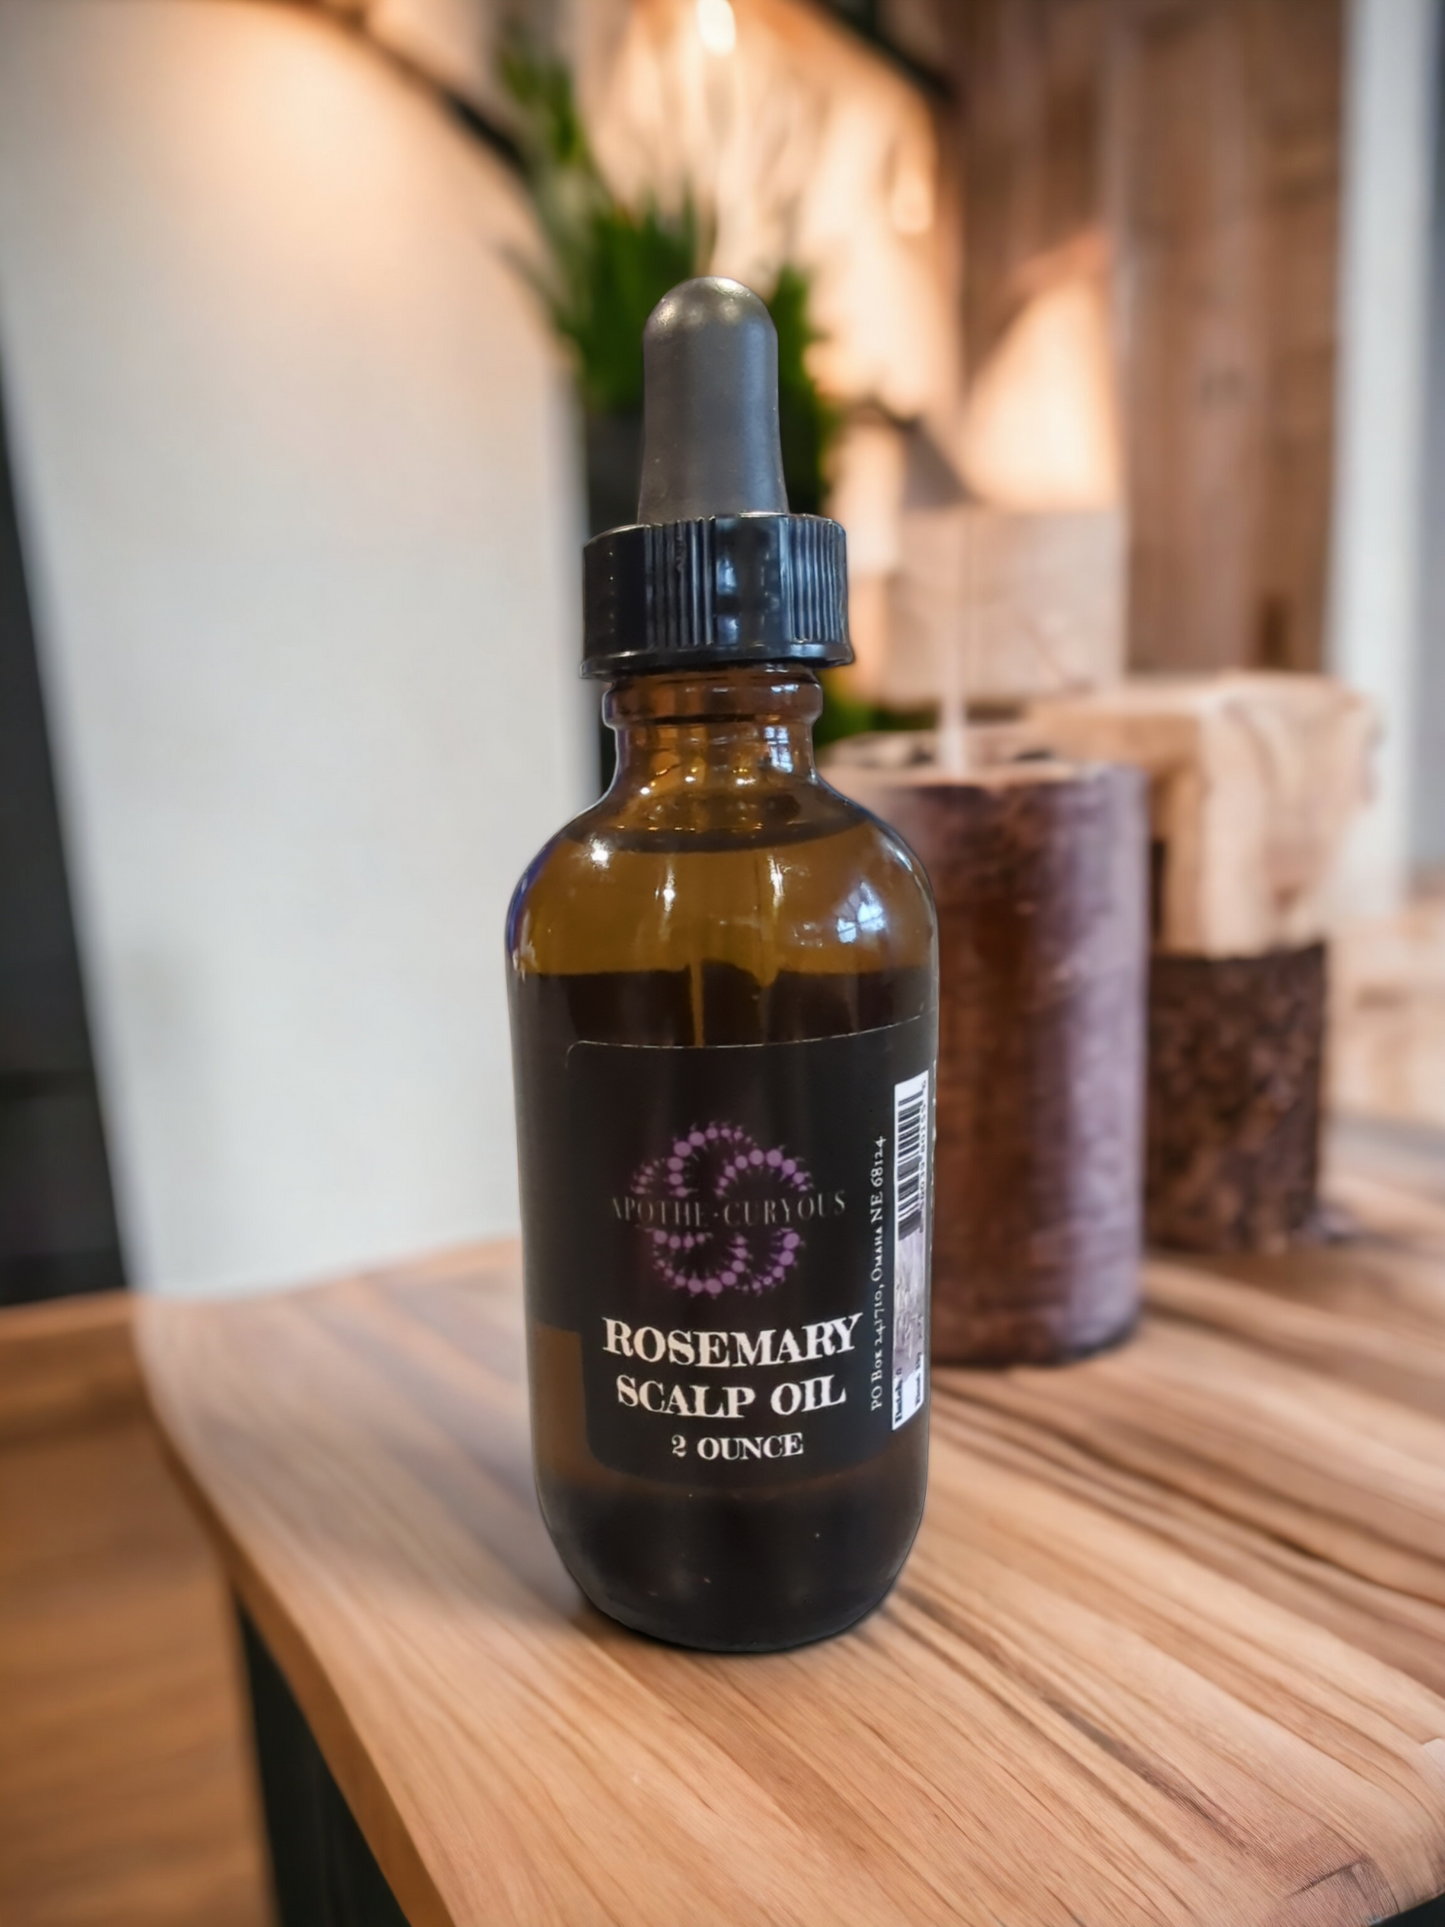 Rosemary scalp oil on counter, 2 ounce glass bottle with dropper top, Apothecuryous